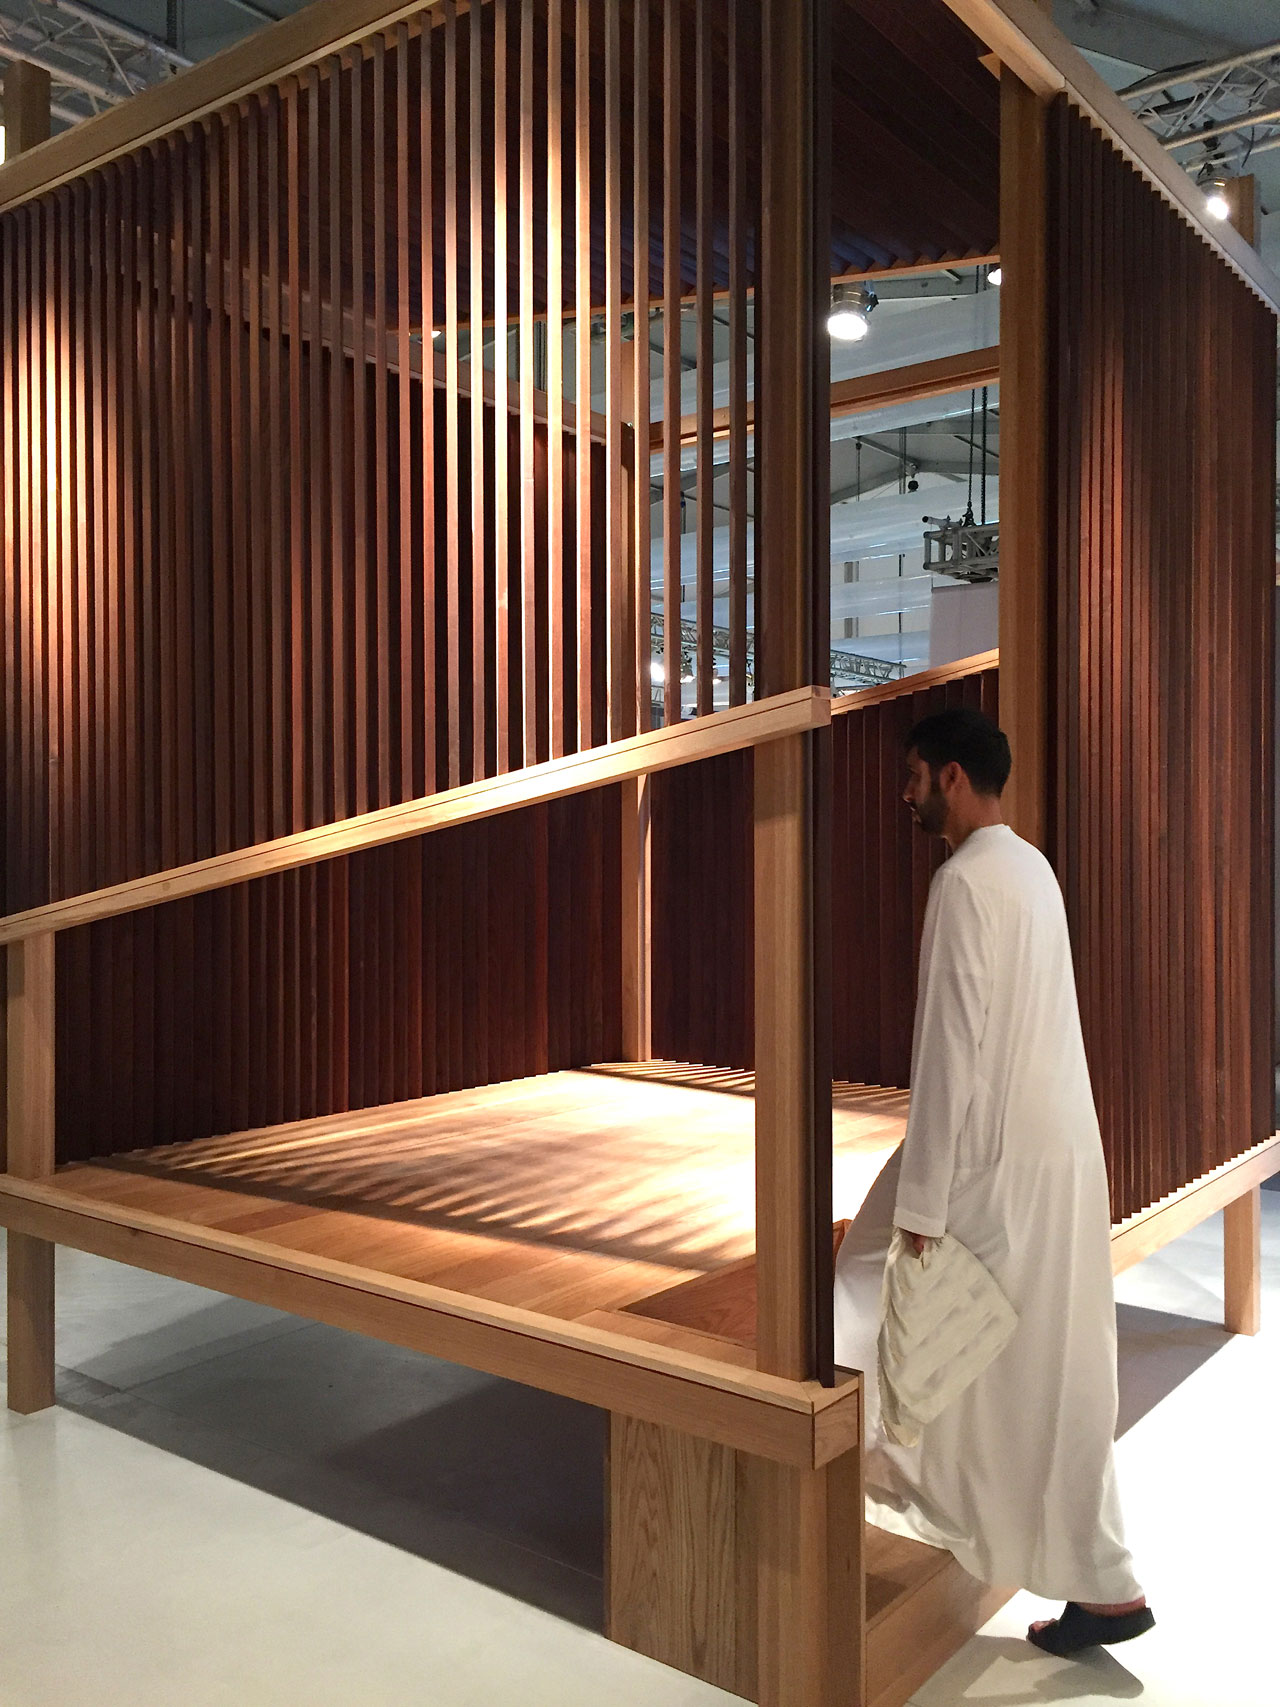 American Hardwood Export Council (AHEC) teamed up with T.ZED Architects - an UAE Based Progressive International Architecture &amp; Design Practice - for the creation of The Cocoon, a floating timber installation using Thermally Modified Ash which was exhibited at Downtown Design Dubai 2016.
Photo by Jose Balitian.